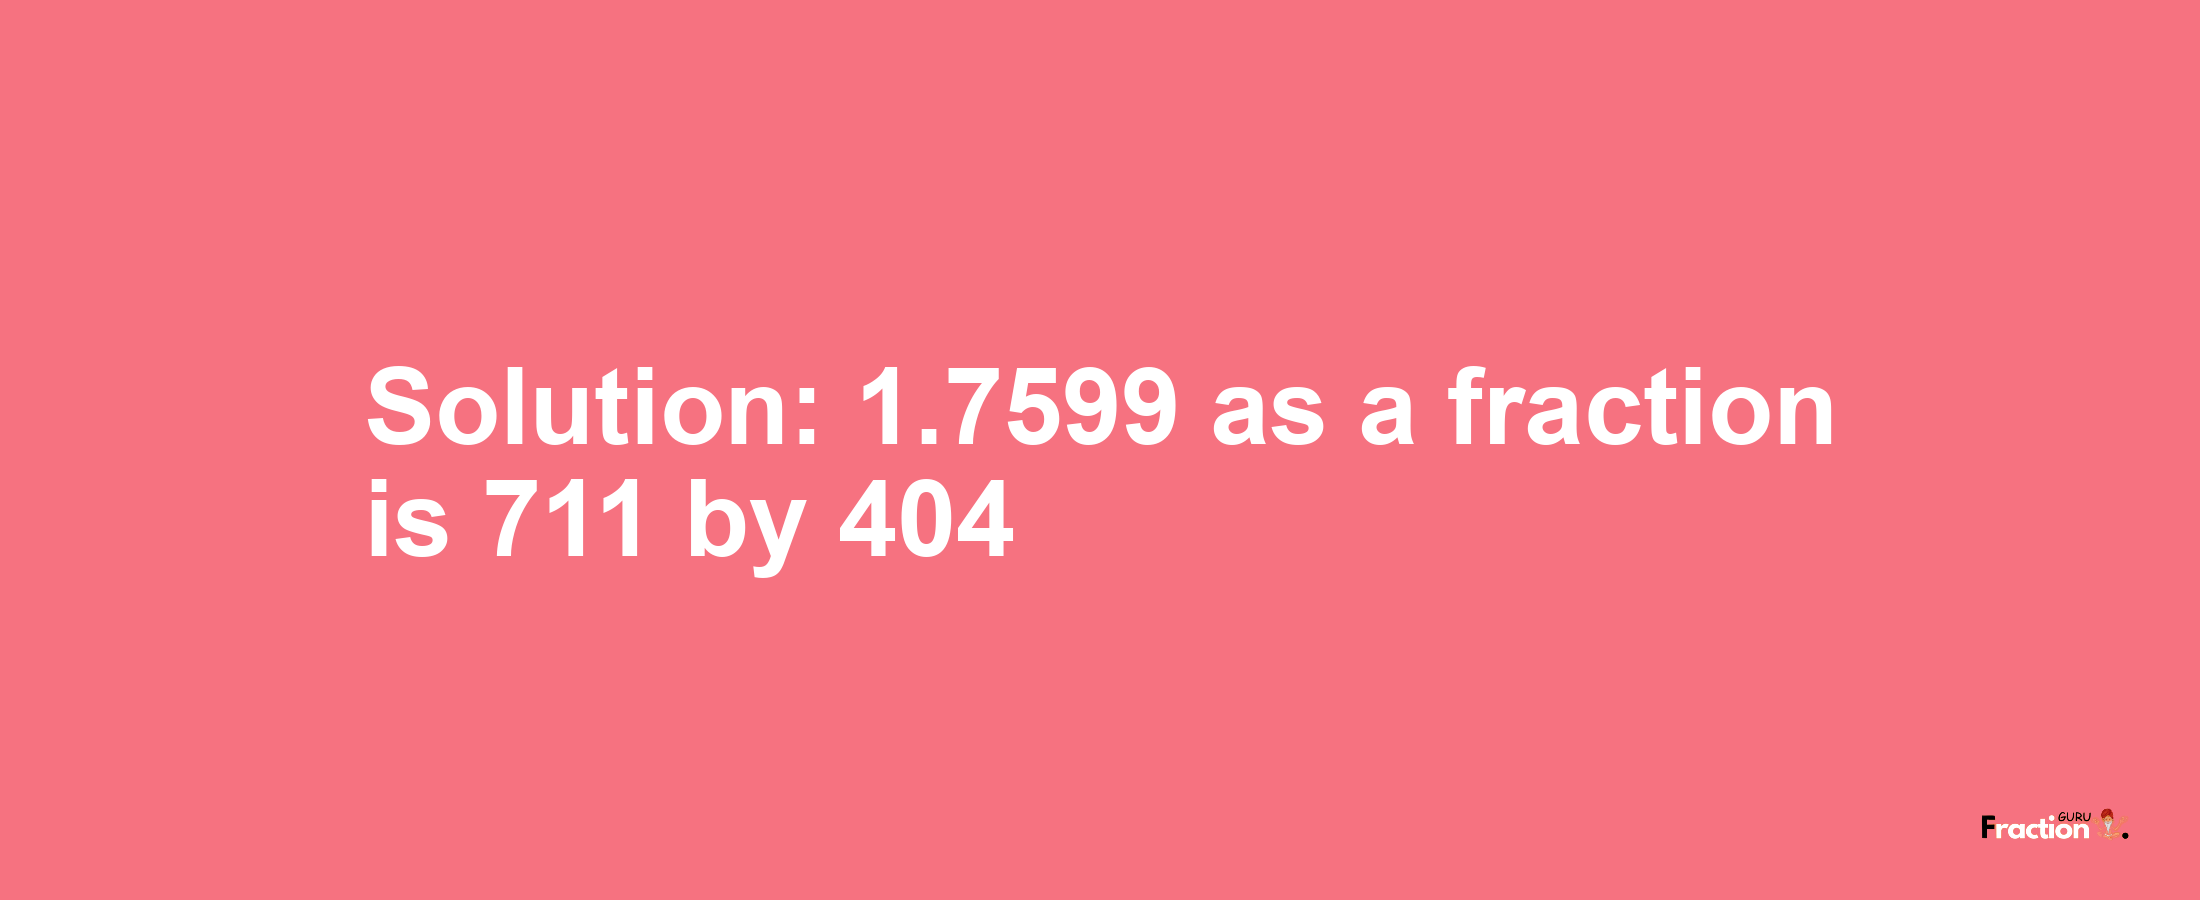 Solution:1.7599 as a fraction is 711/404